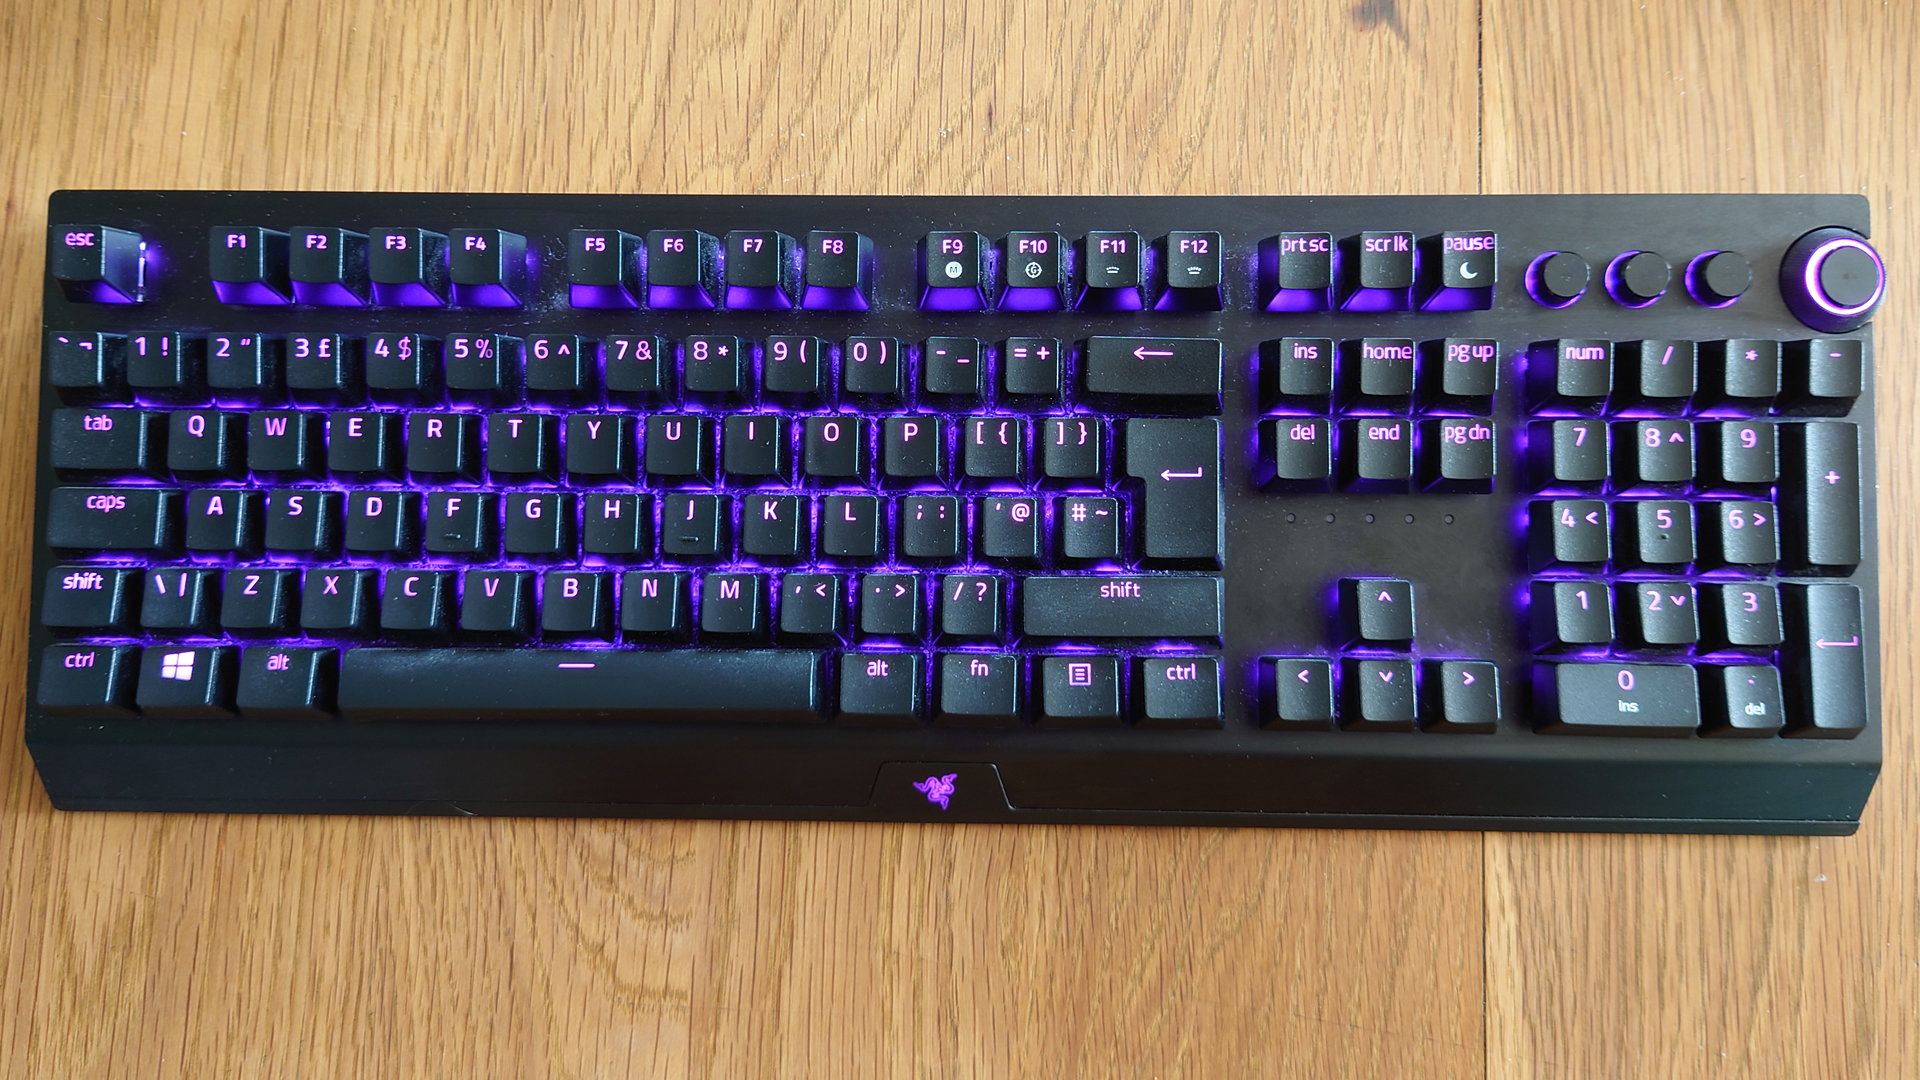 Razer BlackWidow V4 Pro vs Razer BlackWidow V3 Pro: What's the difference?